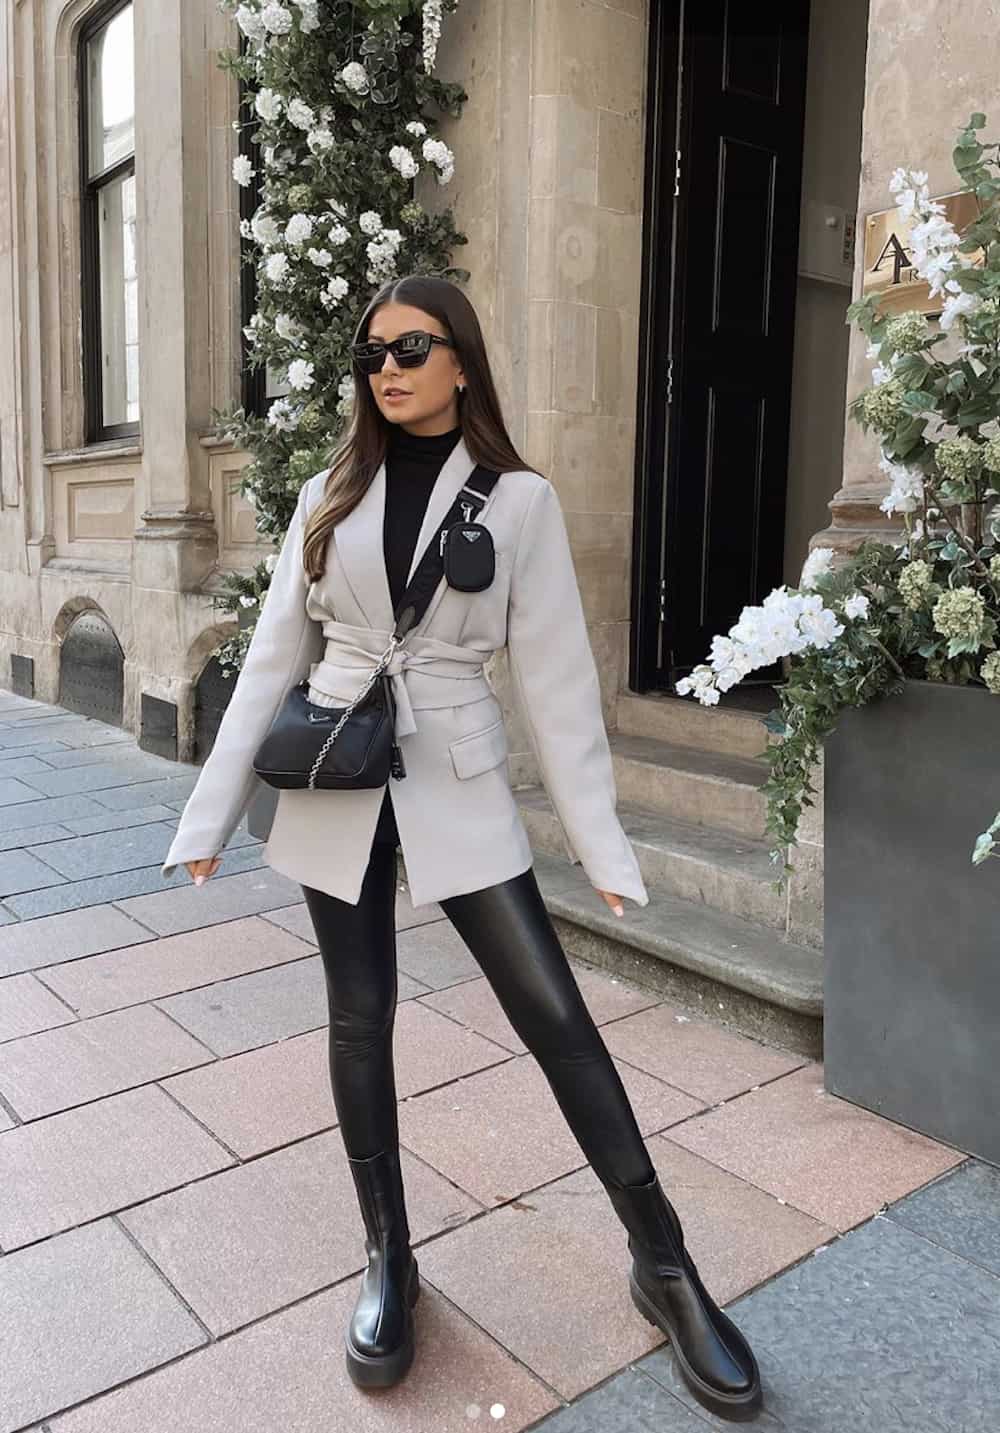 image of a woman wearing a grey blazer jacket, black faux leather leggings, and black lug boots